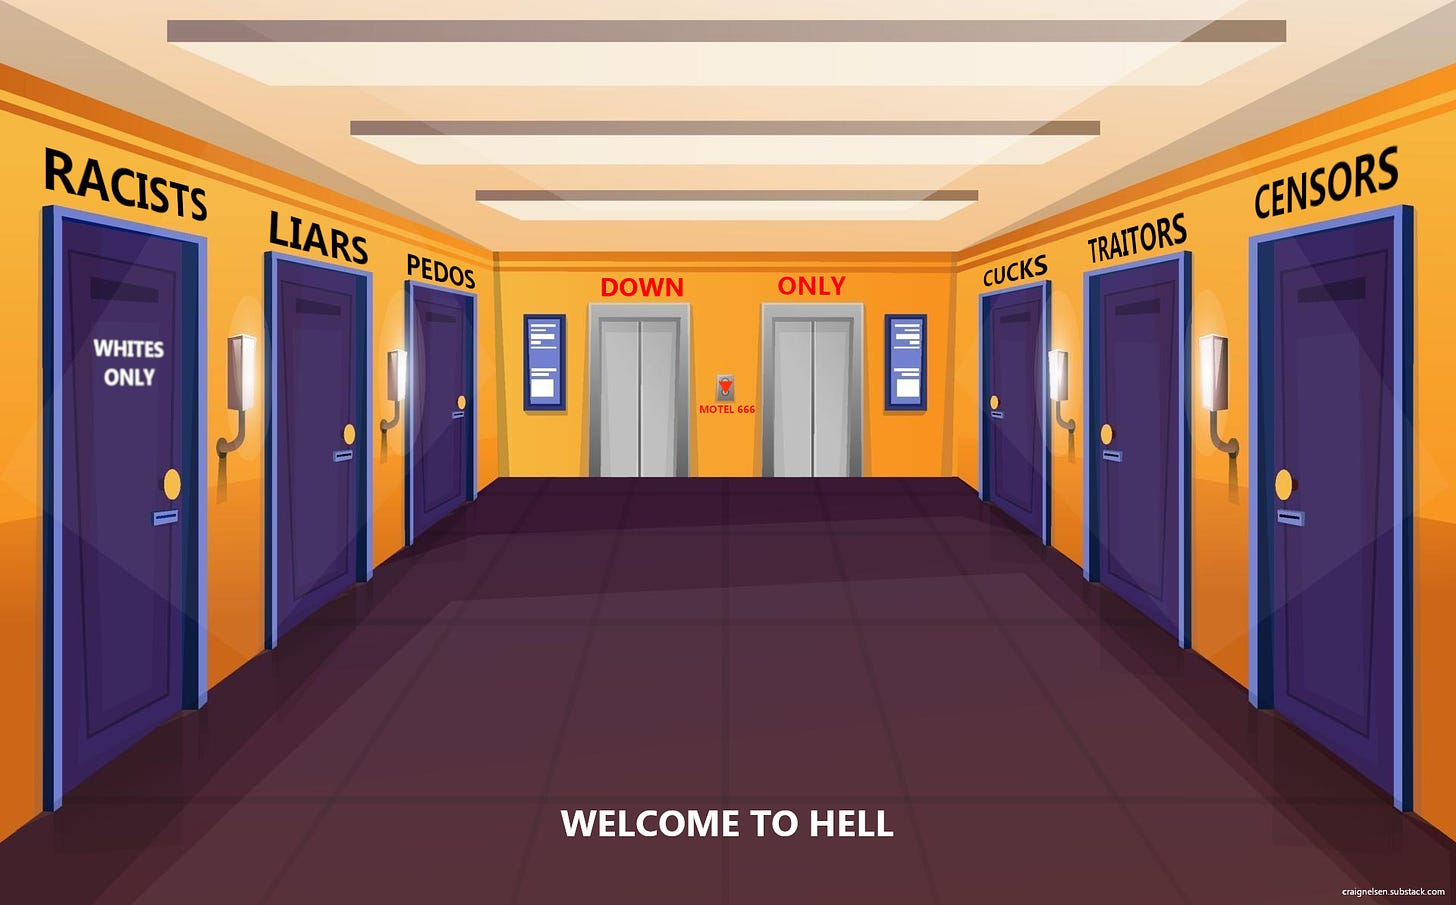 Image showing a picture of hell and the door for racists says "whites only"